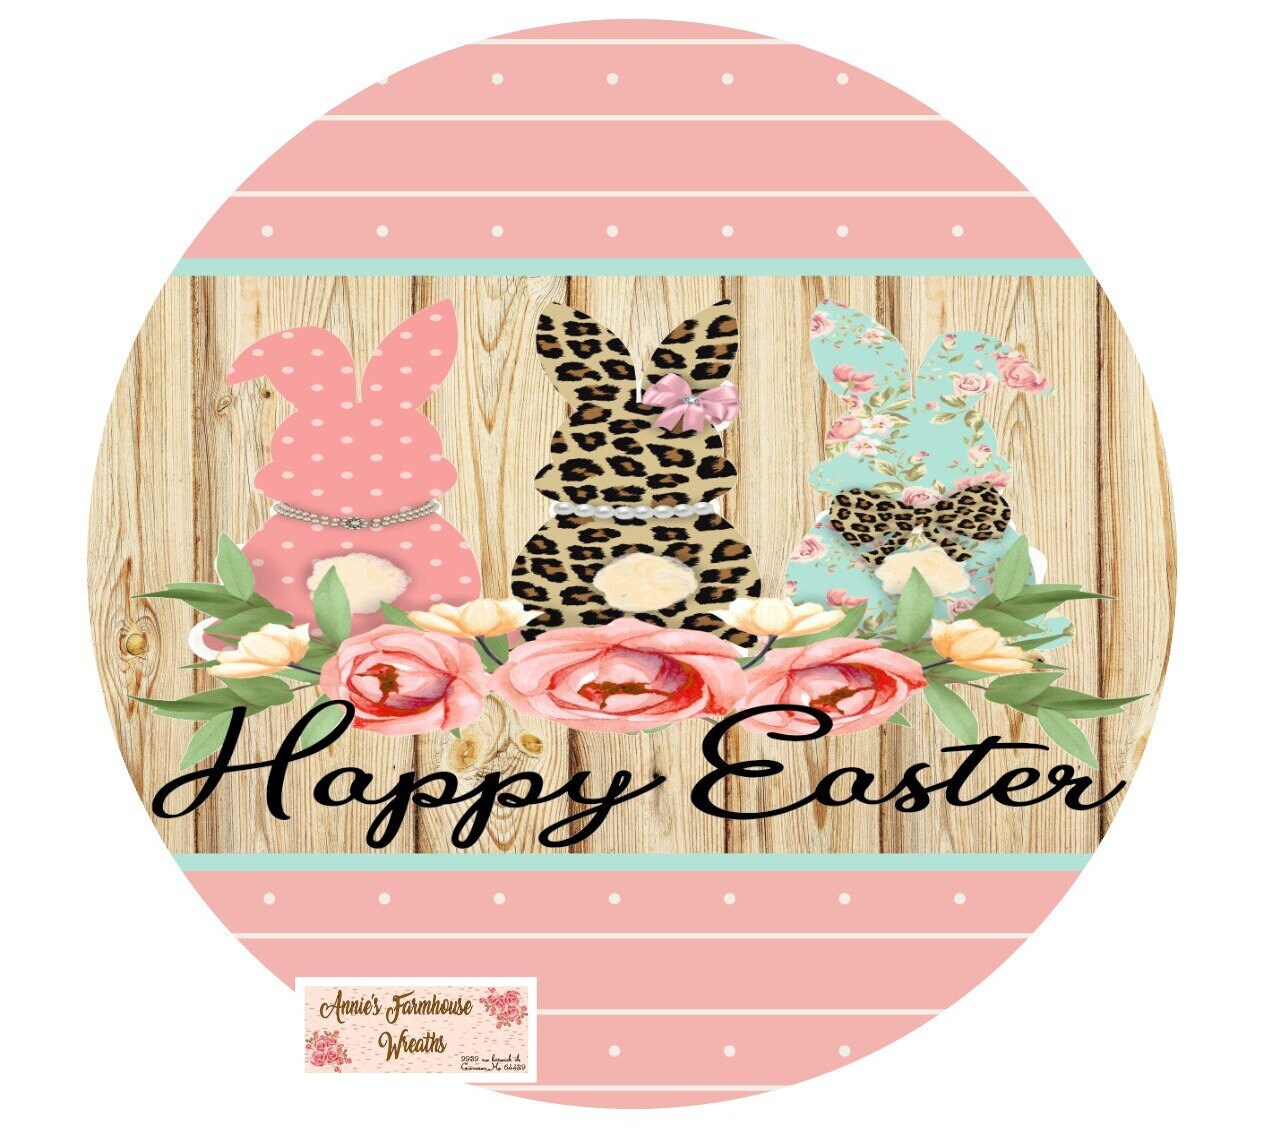 Round metal wreath sign, Happy Easter, Bunny Springtime cheetah print sign